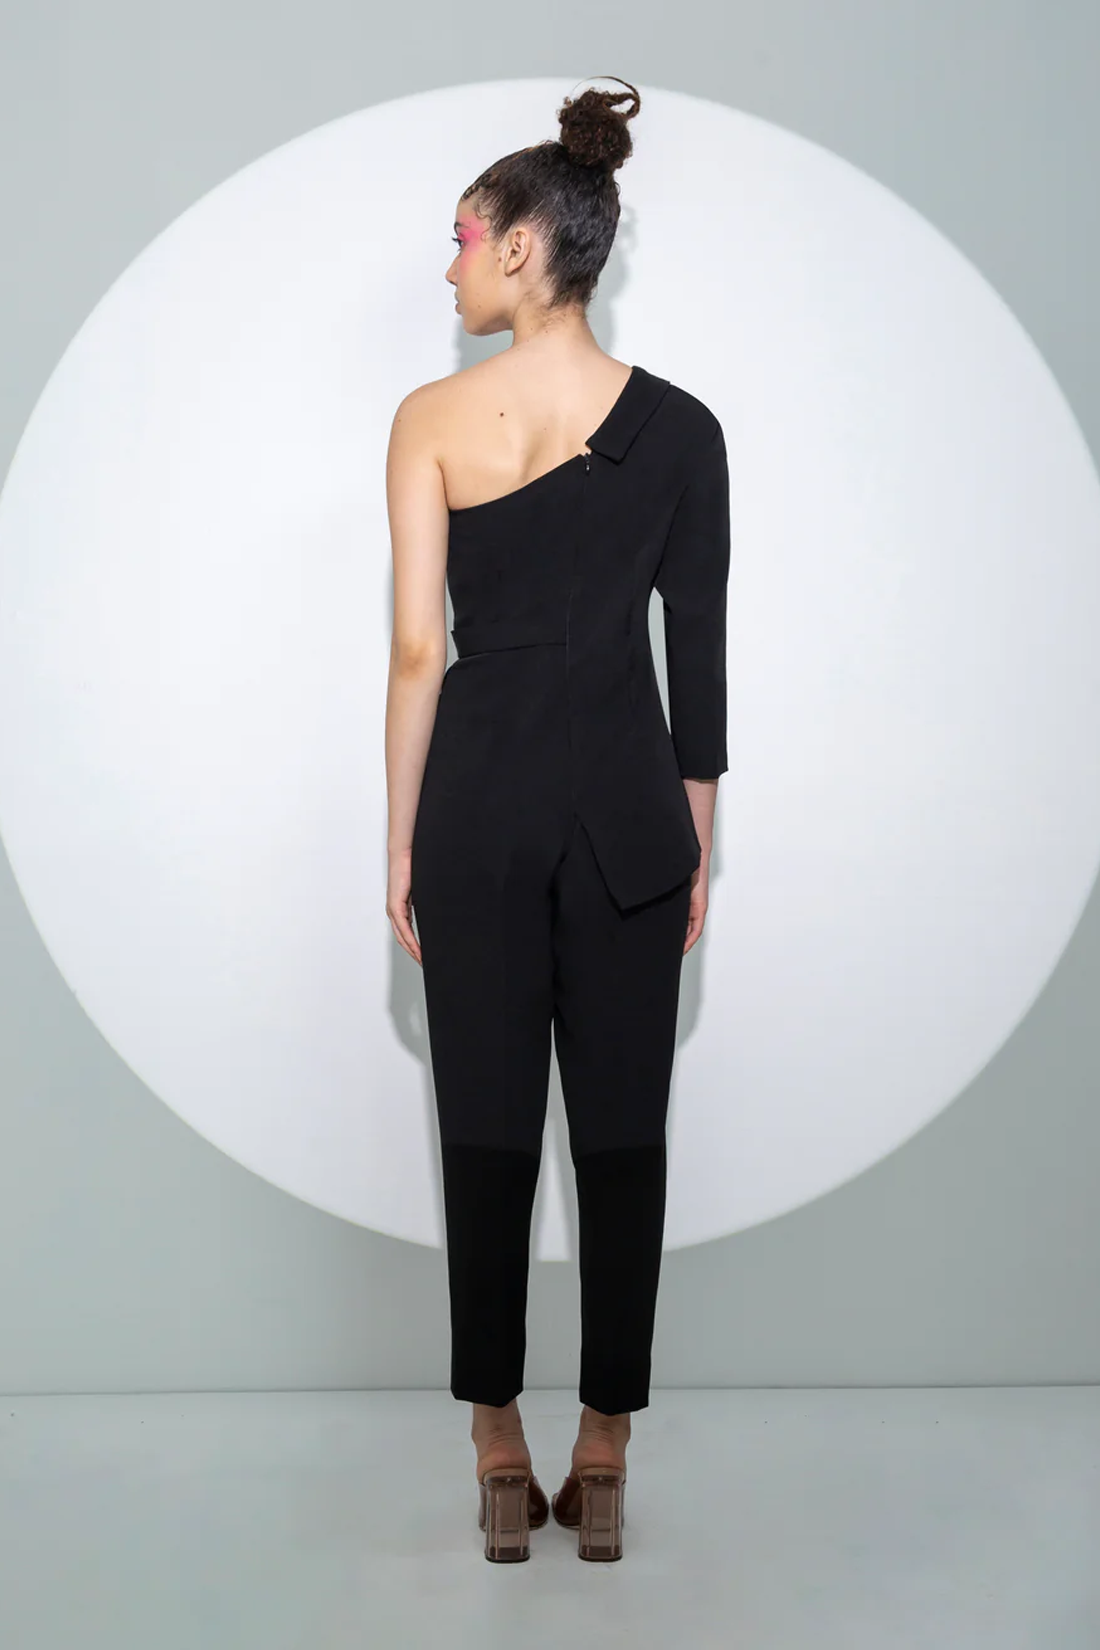 Thumbnail preview #7 for Half and Half Jumpsuit